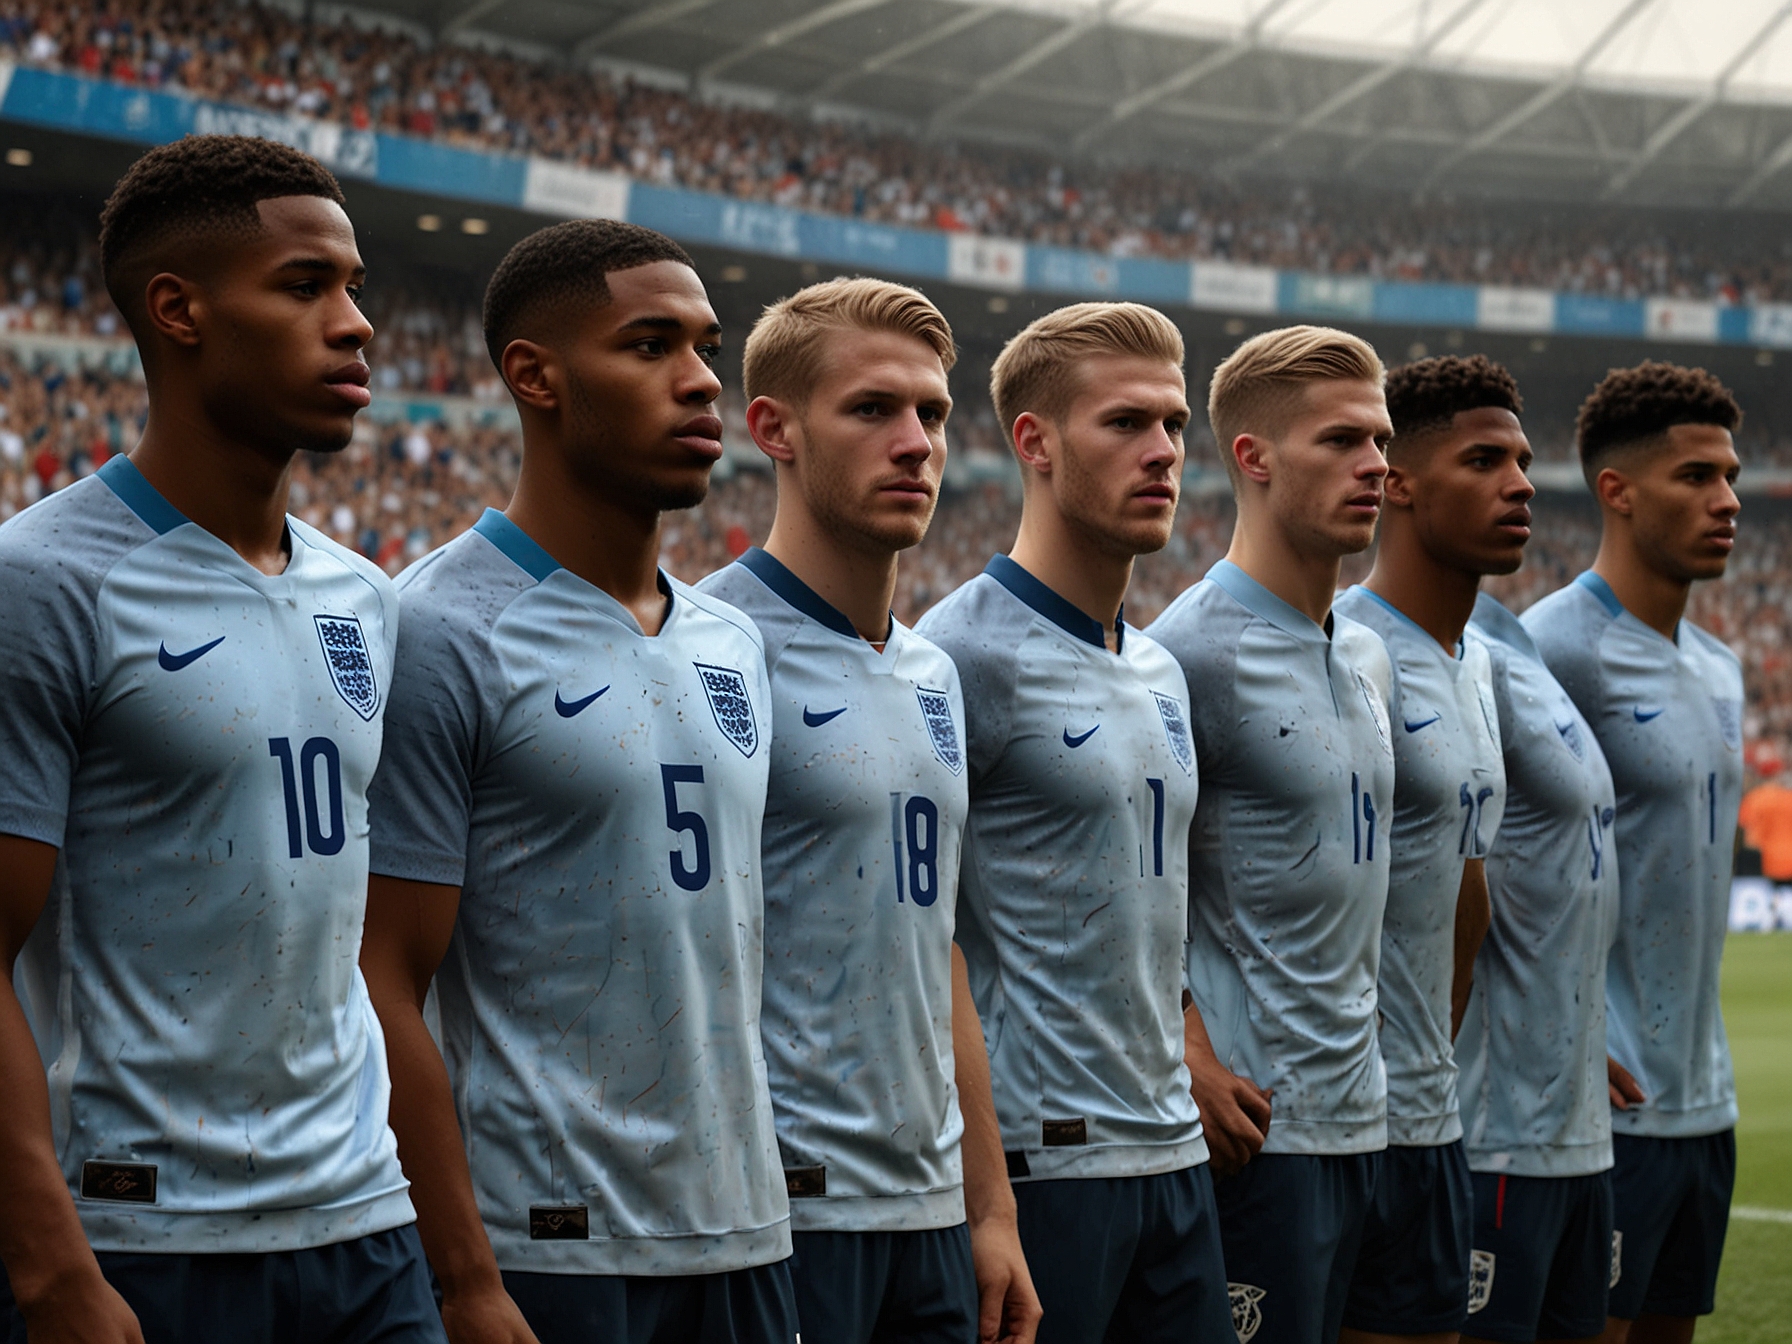 Image of England's 2017 football squad lining up before the World Cup qualifier against Slovakia, highlighting players such as Joe Hart and Marcus Rashford who made significant contributions.